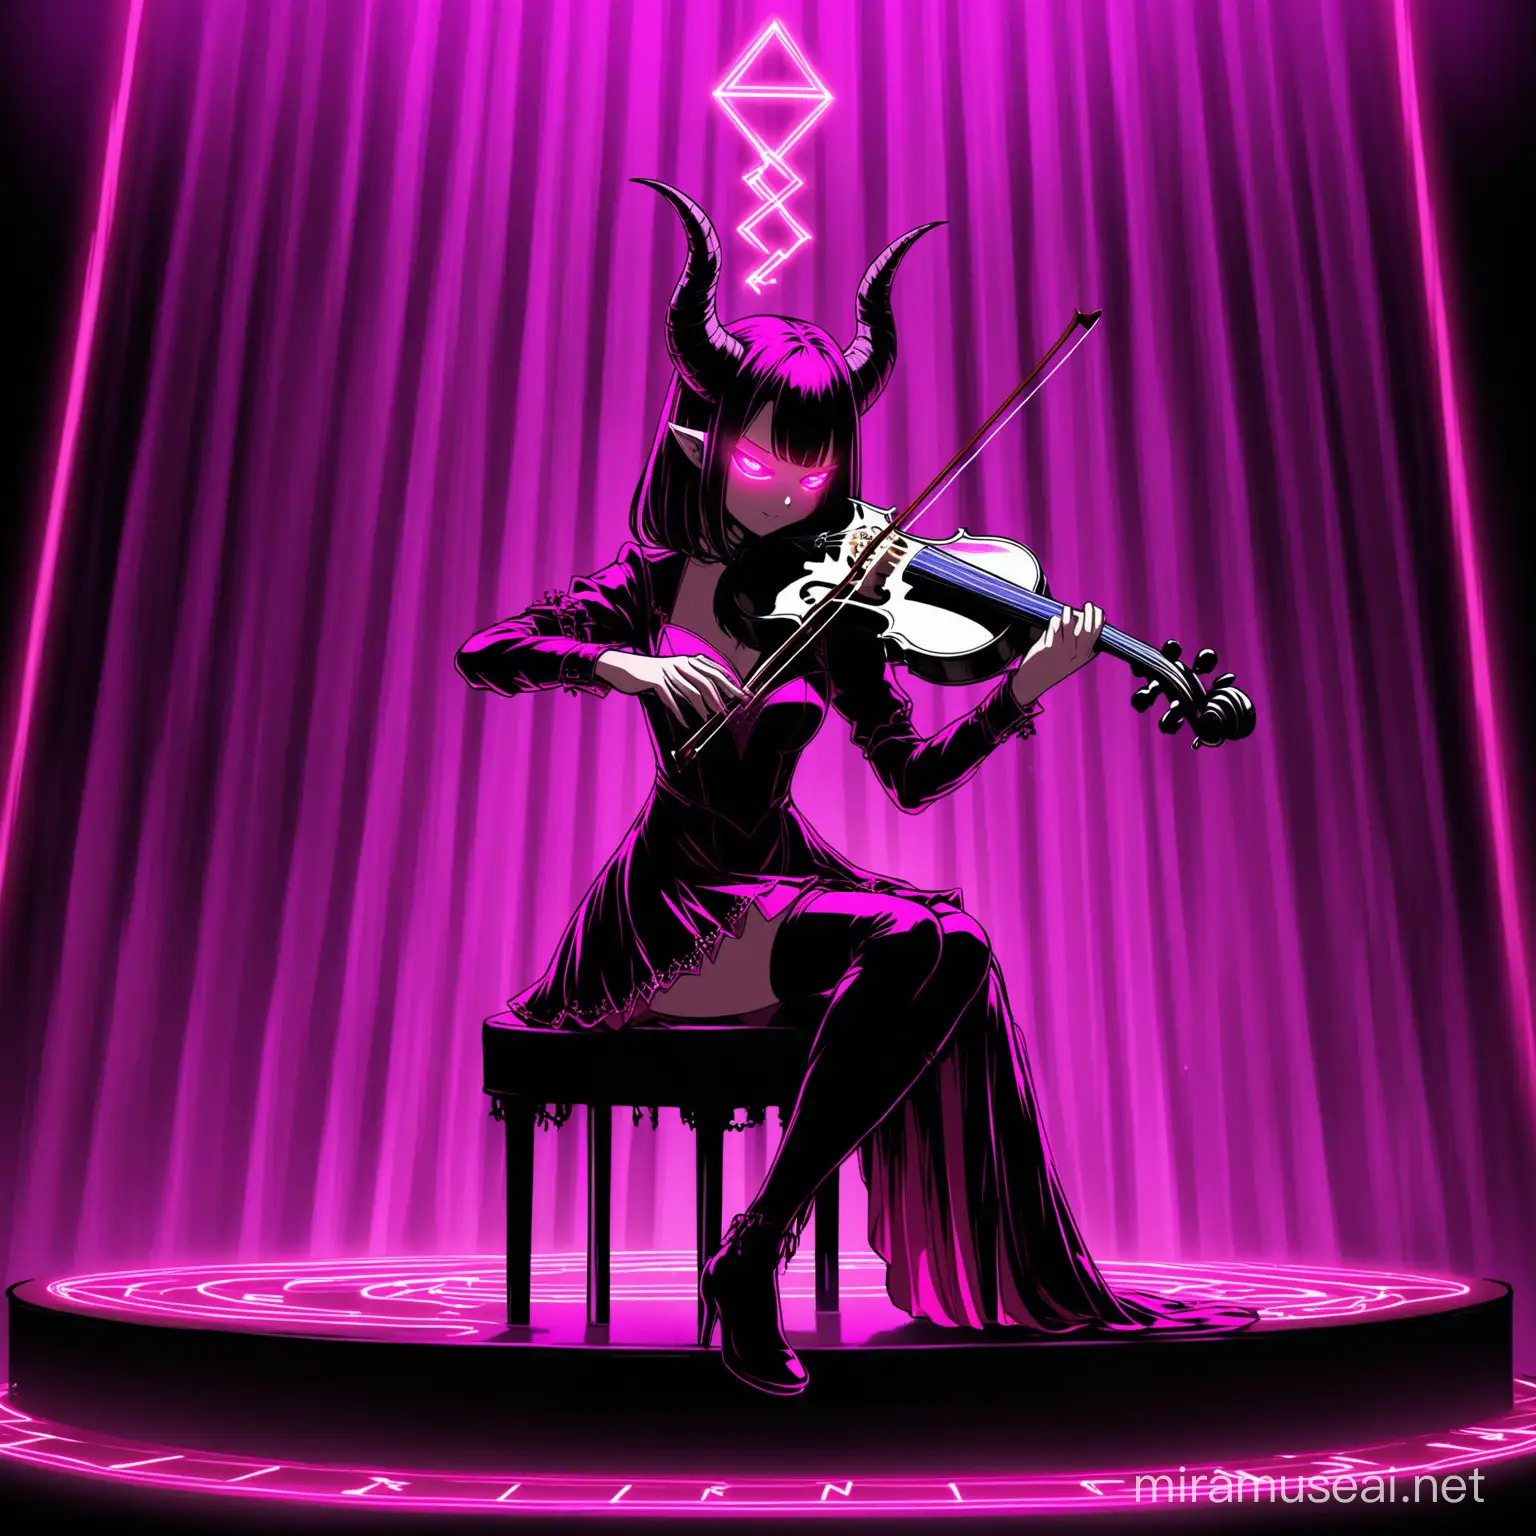 Ventillaquist-dummy playing the violin
appreance- demon /female/horns/ full body/ sitting on stage/ noir red-pink outfit(dress)/ neon pink glowing eyes/ pink-runes-glyphs lines on violin/ cute/sullen face/
background- stage/noir purple curtains/ under light
